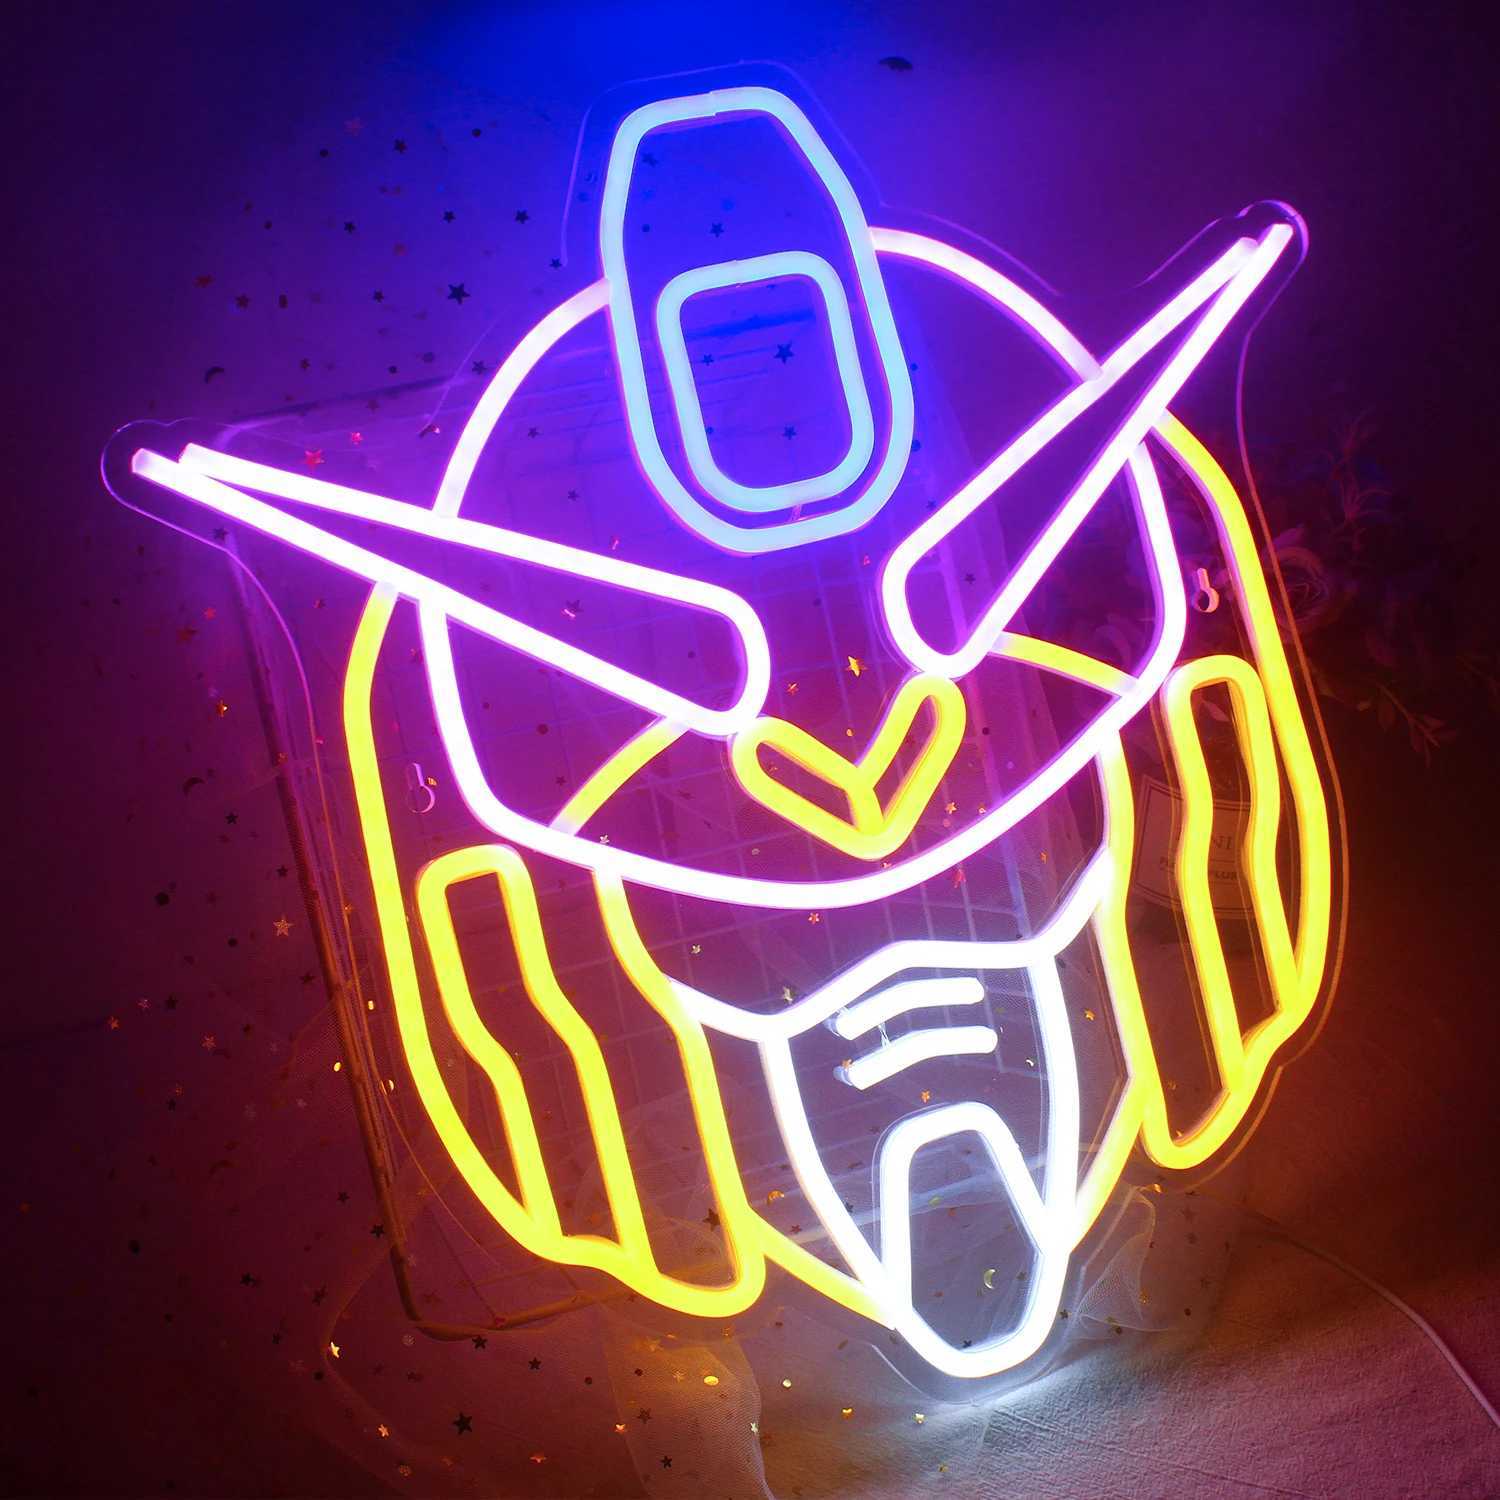 LED Neon Sign Ineonlife Transformers Neon Sign Led Light Bedroom Letters USB Game Room Bar Party Indoor Home Arcade Shop Art Wall Decoration YQ240126